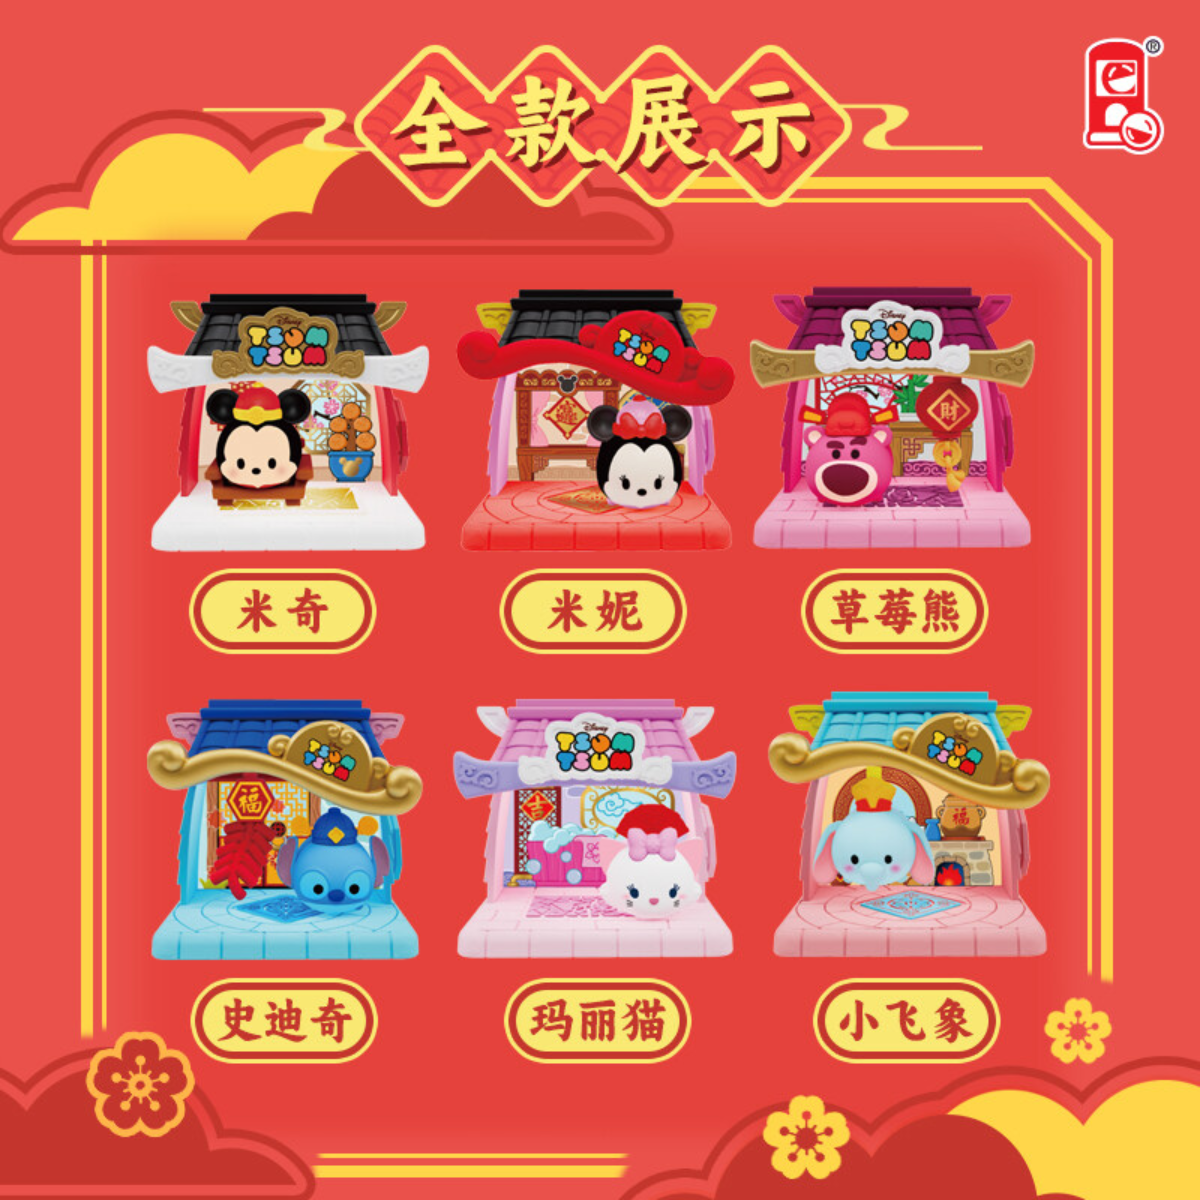 Lioh Toy x Disney Tsum Tsum Wishing Happy New Year Series-Single Box (Random)-Lioh Toy-Ace Cards & Collectibles